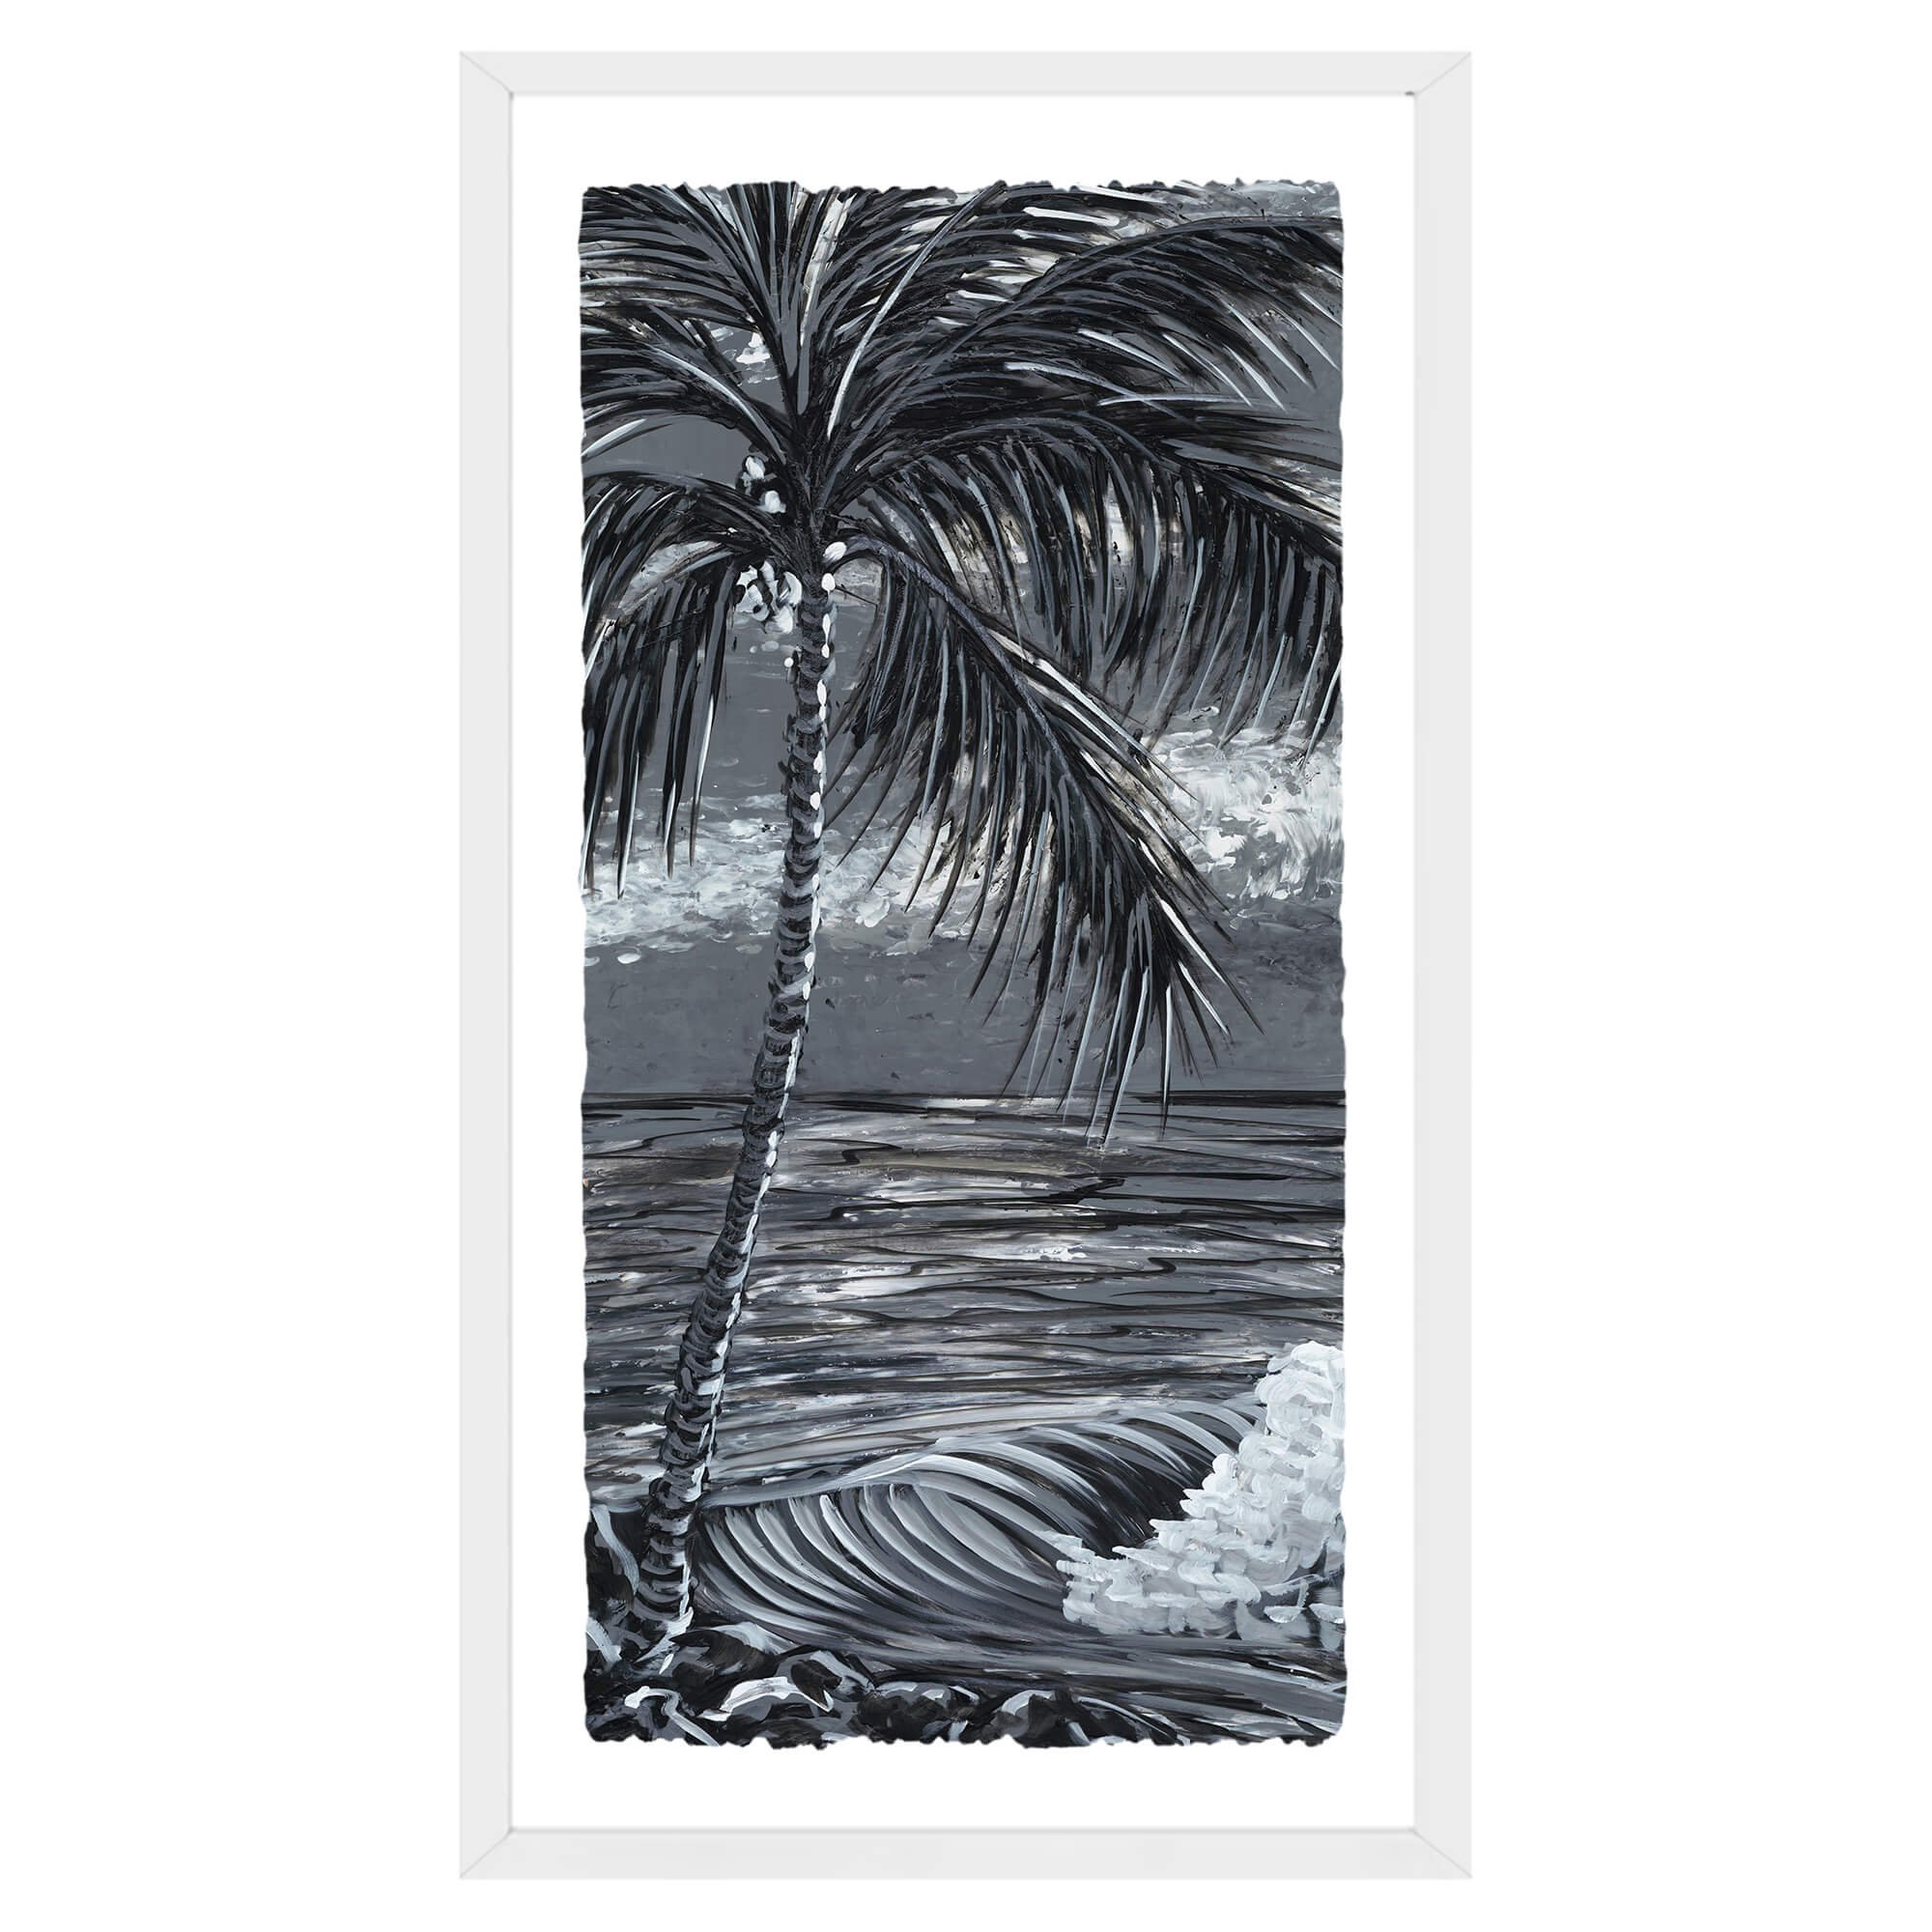 Paper art print showcasing the clear water by hawaii artist Suzanne MacAdam